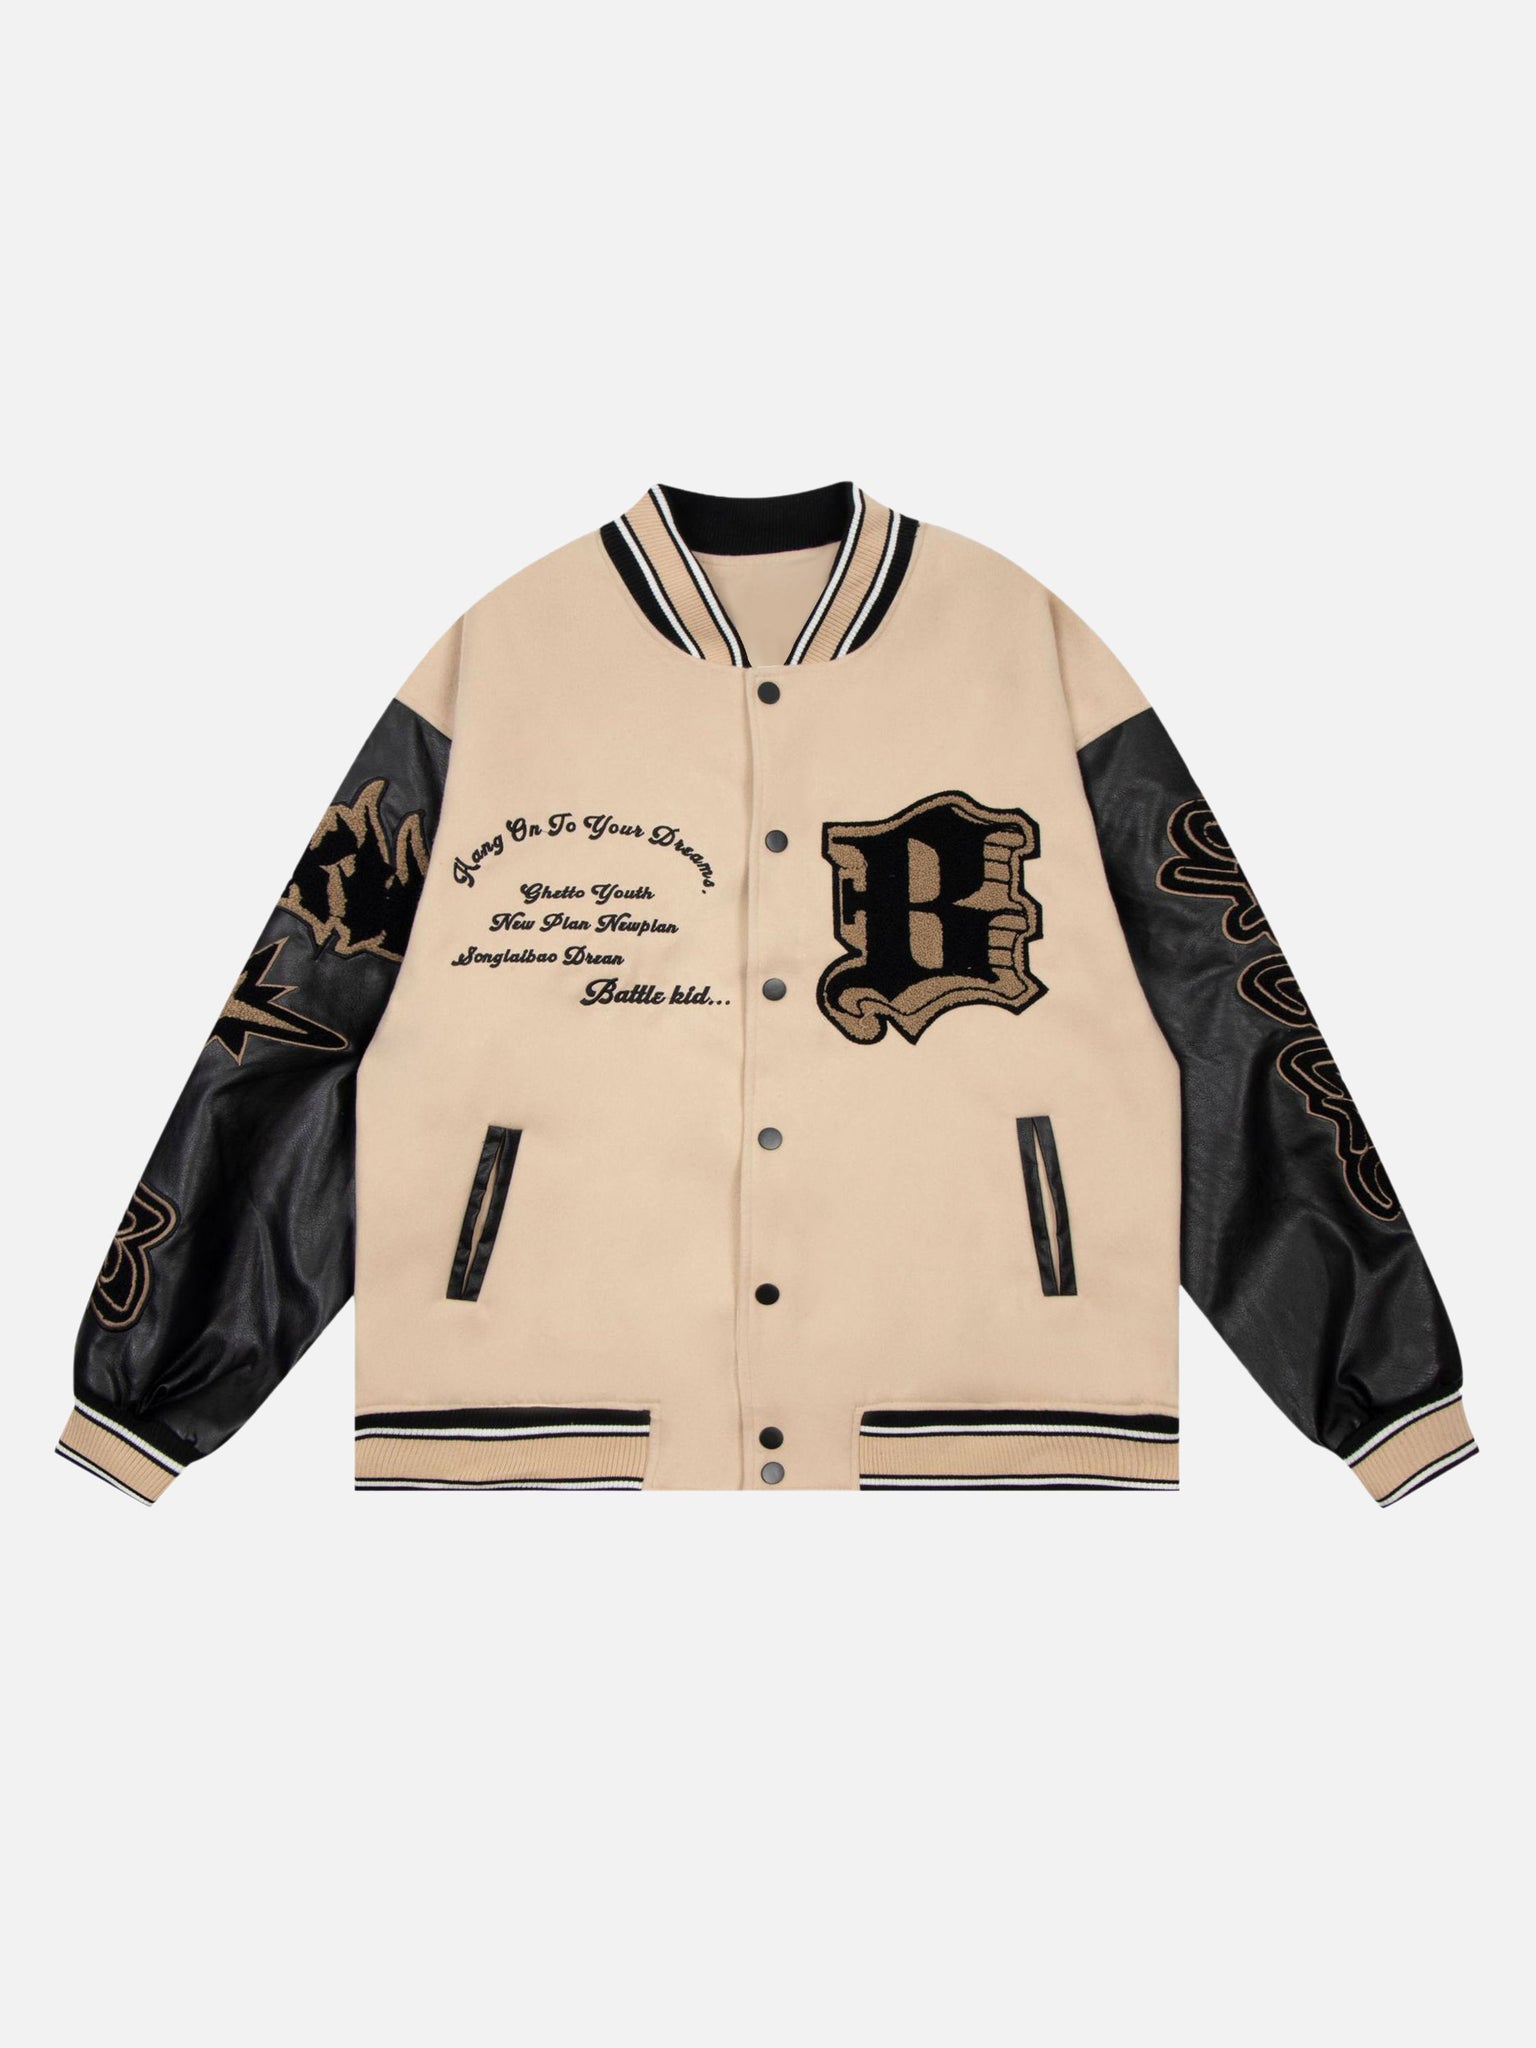 Thesupermade American Creative Flame Elements Letter Embroidery Baseball Jacket -1608